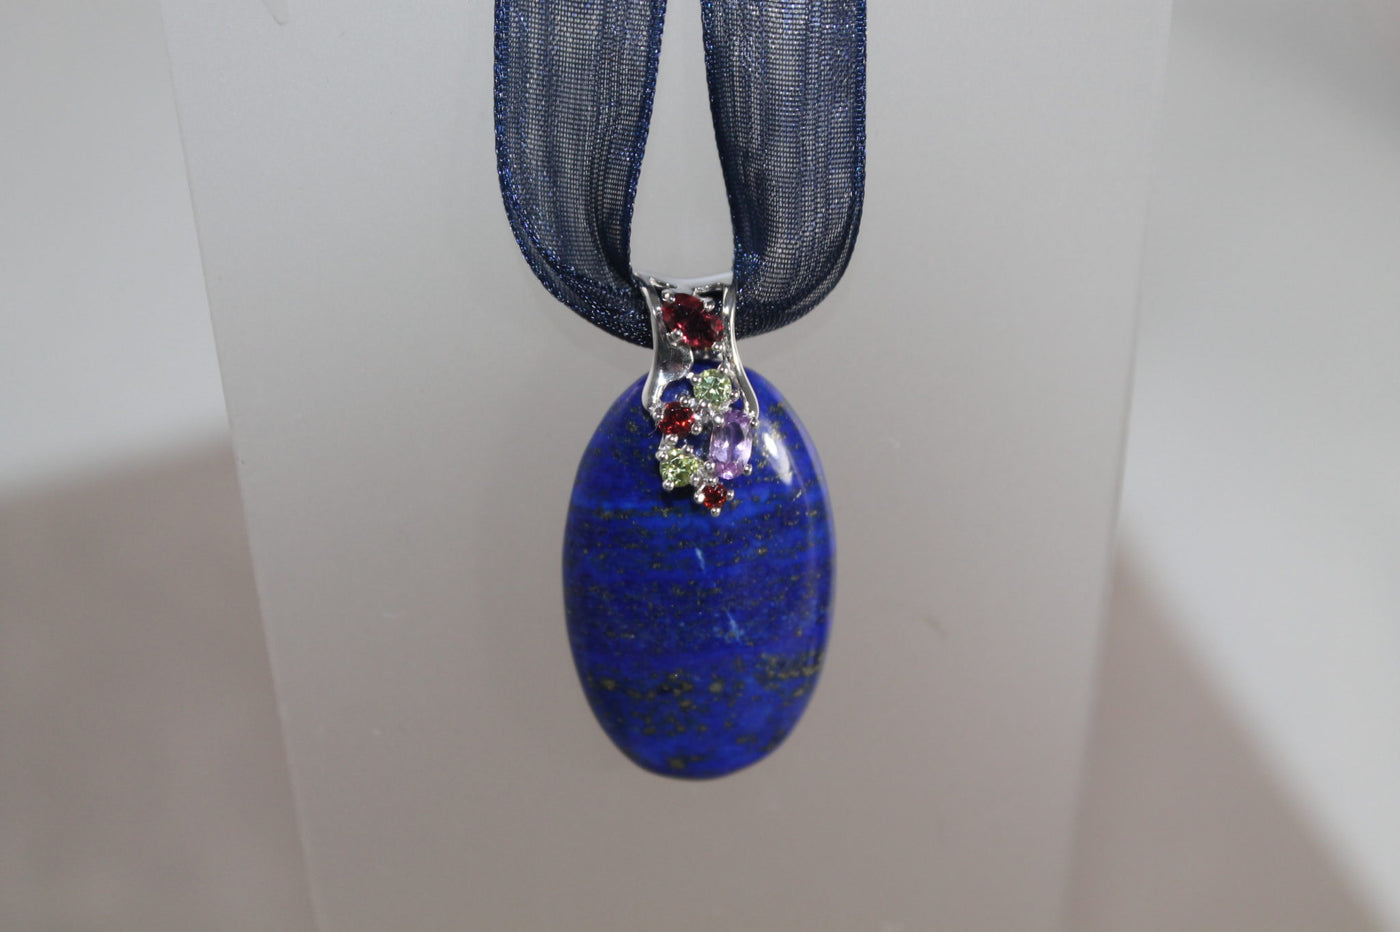 Lapis and gems pendant set in sterling silver